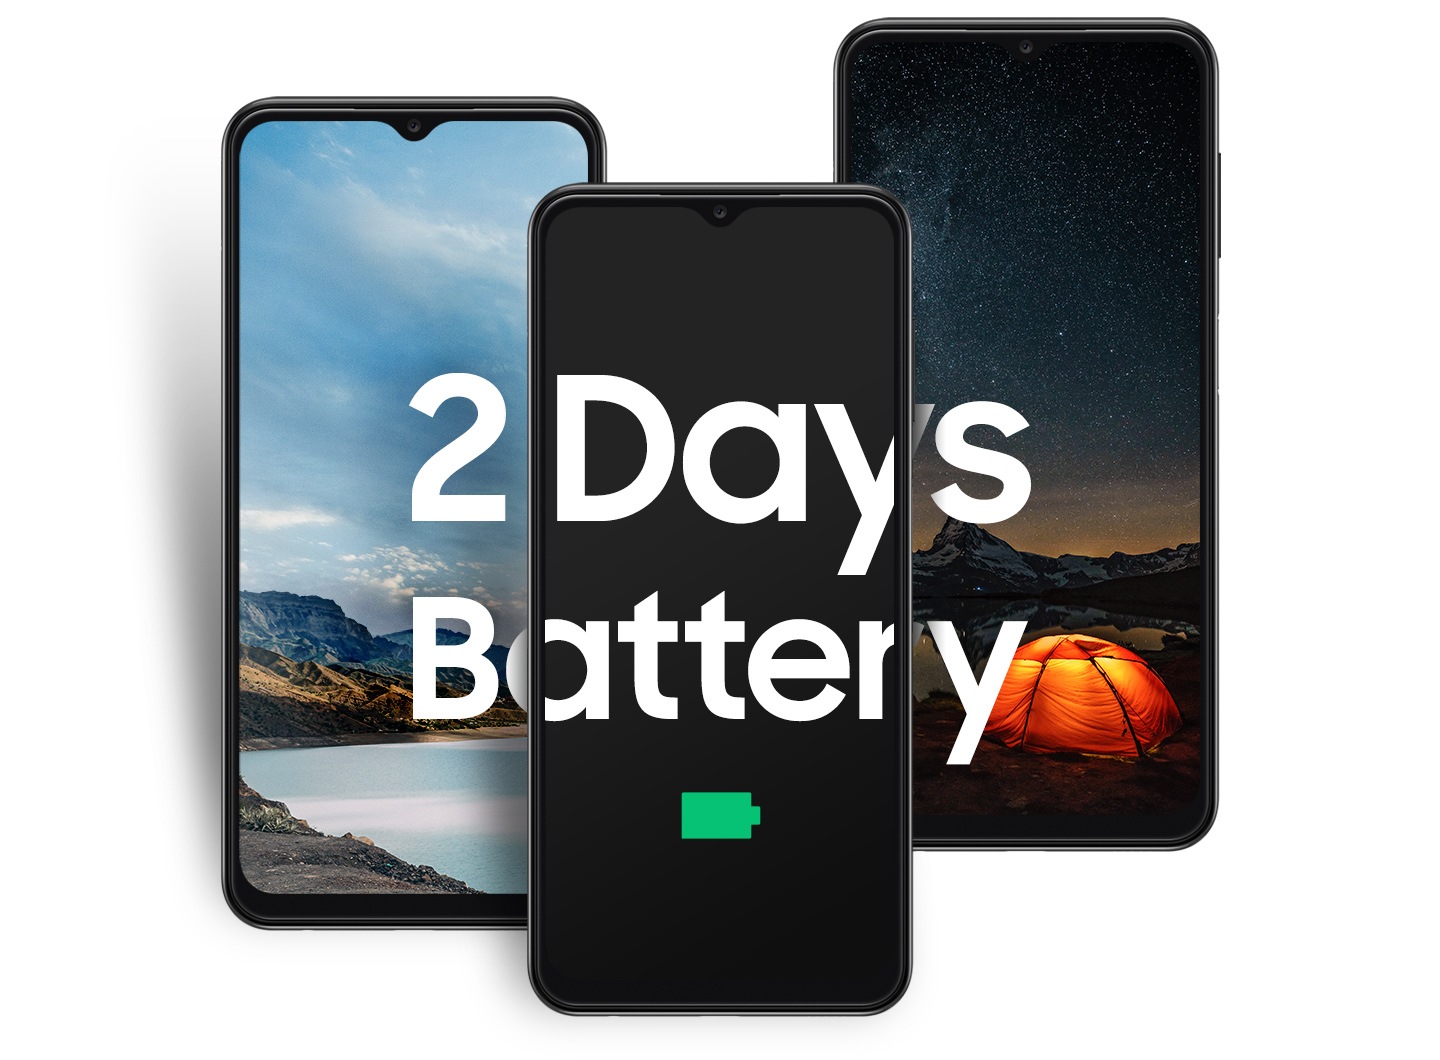 Samsung Galaxy A13 comes with an awesome battery lasts two days. The 5,000mAh (typical) battery lets you keep doing what you do. The Galaxy A13 is placed between two images, with the left showing the coast and the right showing the tents